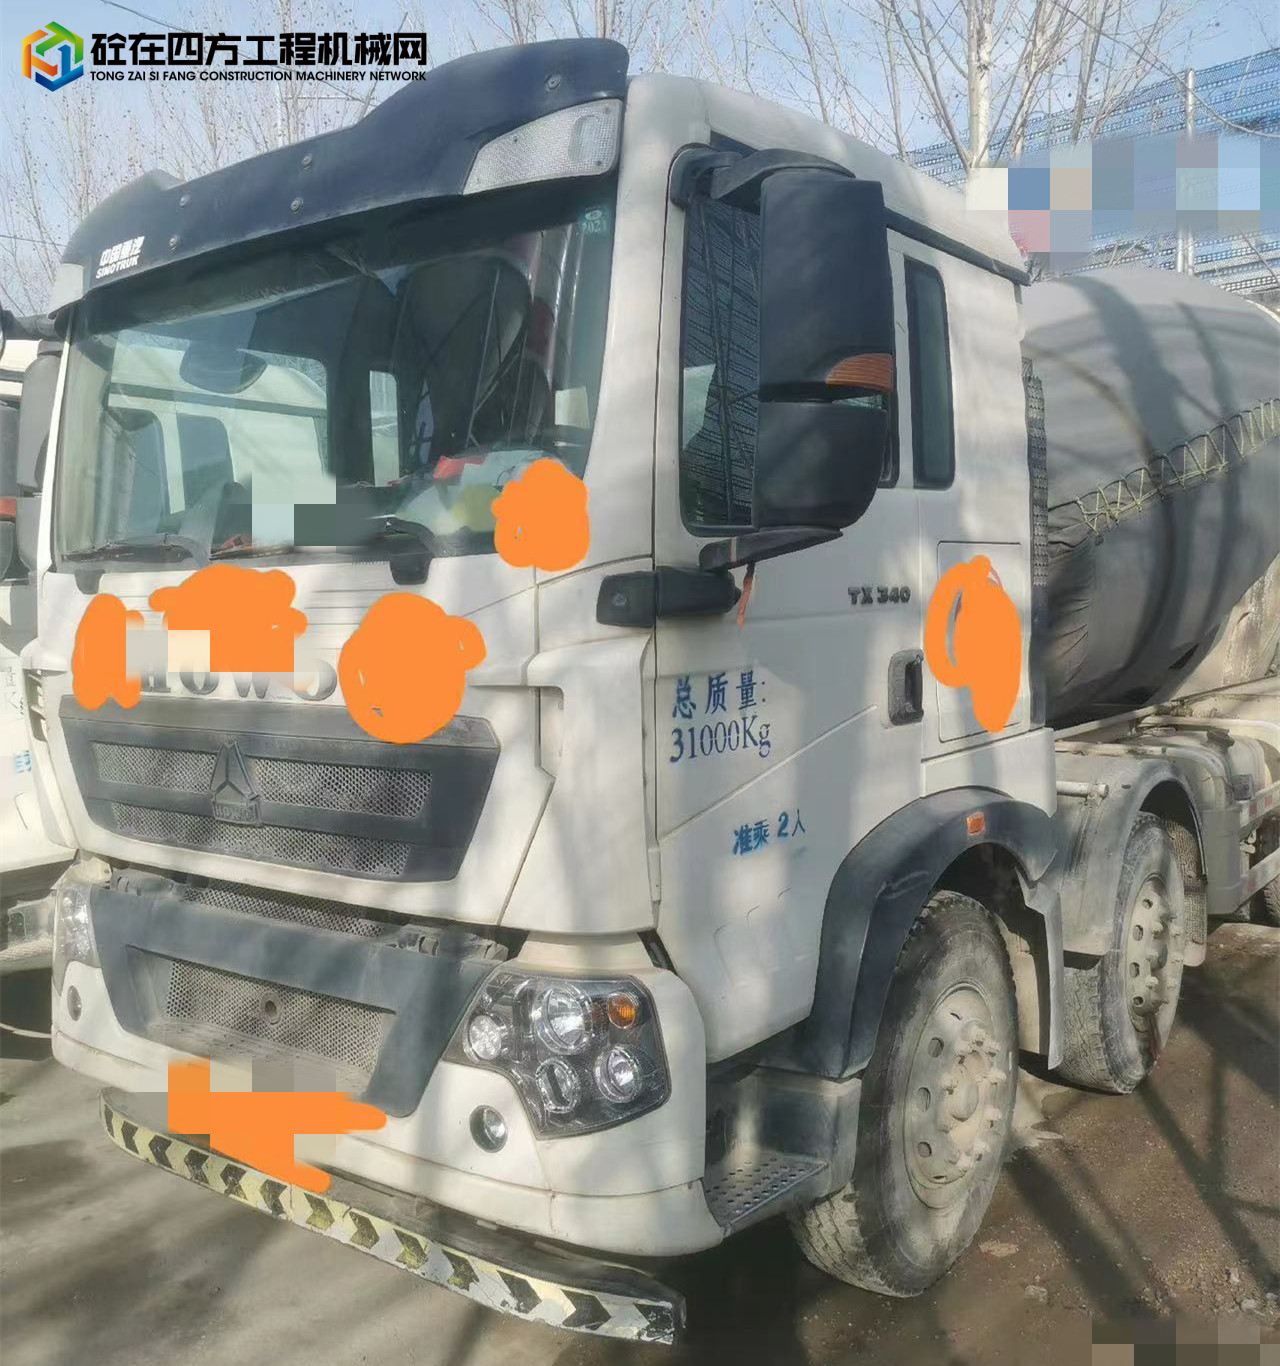 https://images.tongzsf.com/tong/truck_machine/20231009/16523adc69c9af.jpg